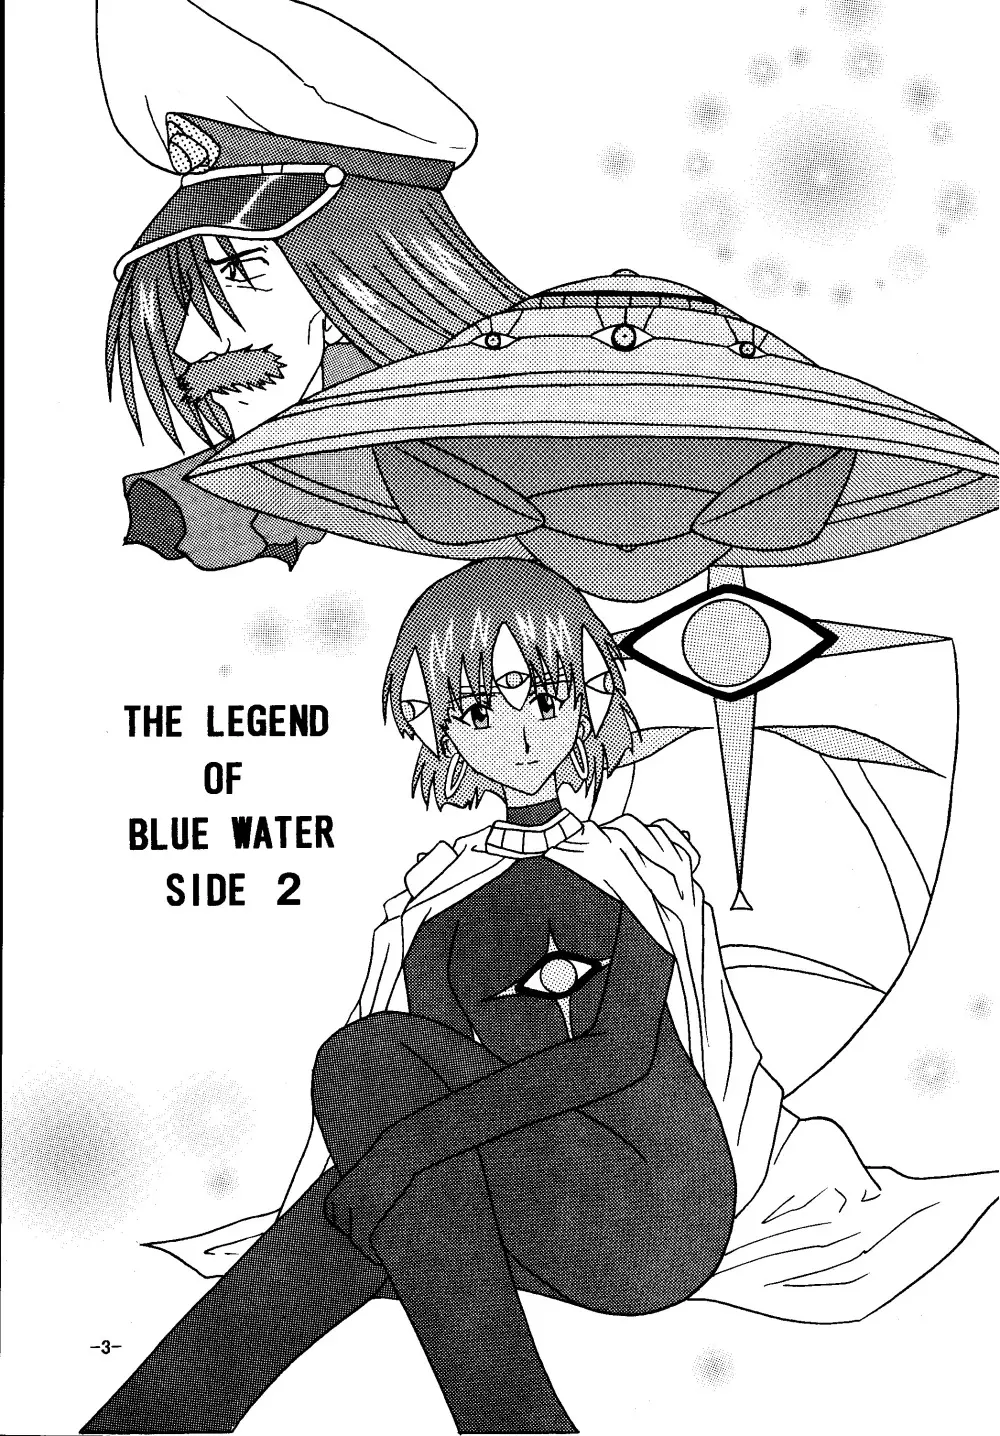 THE LEGEND OF BLUE WATER SIDE 2 2ページ